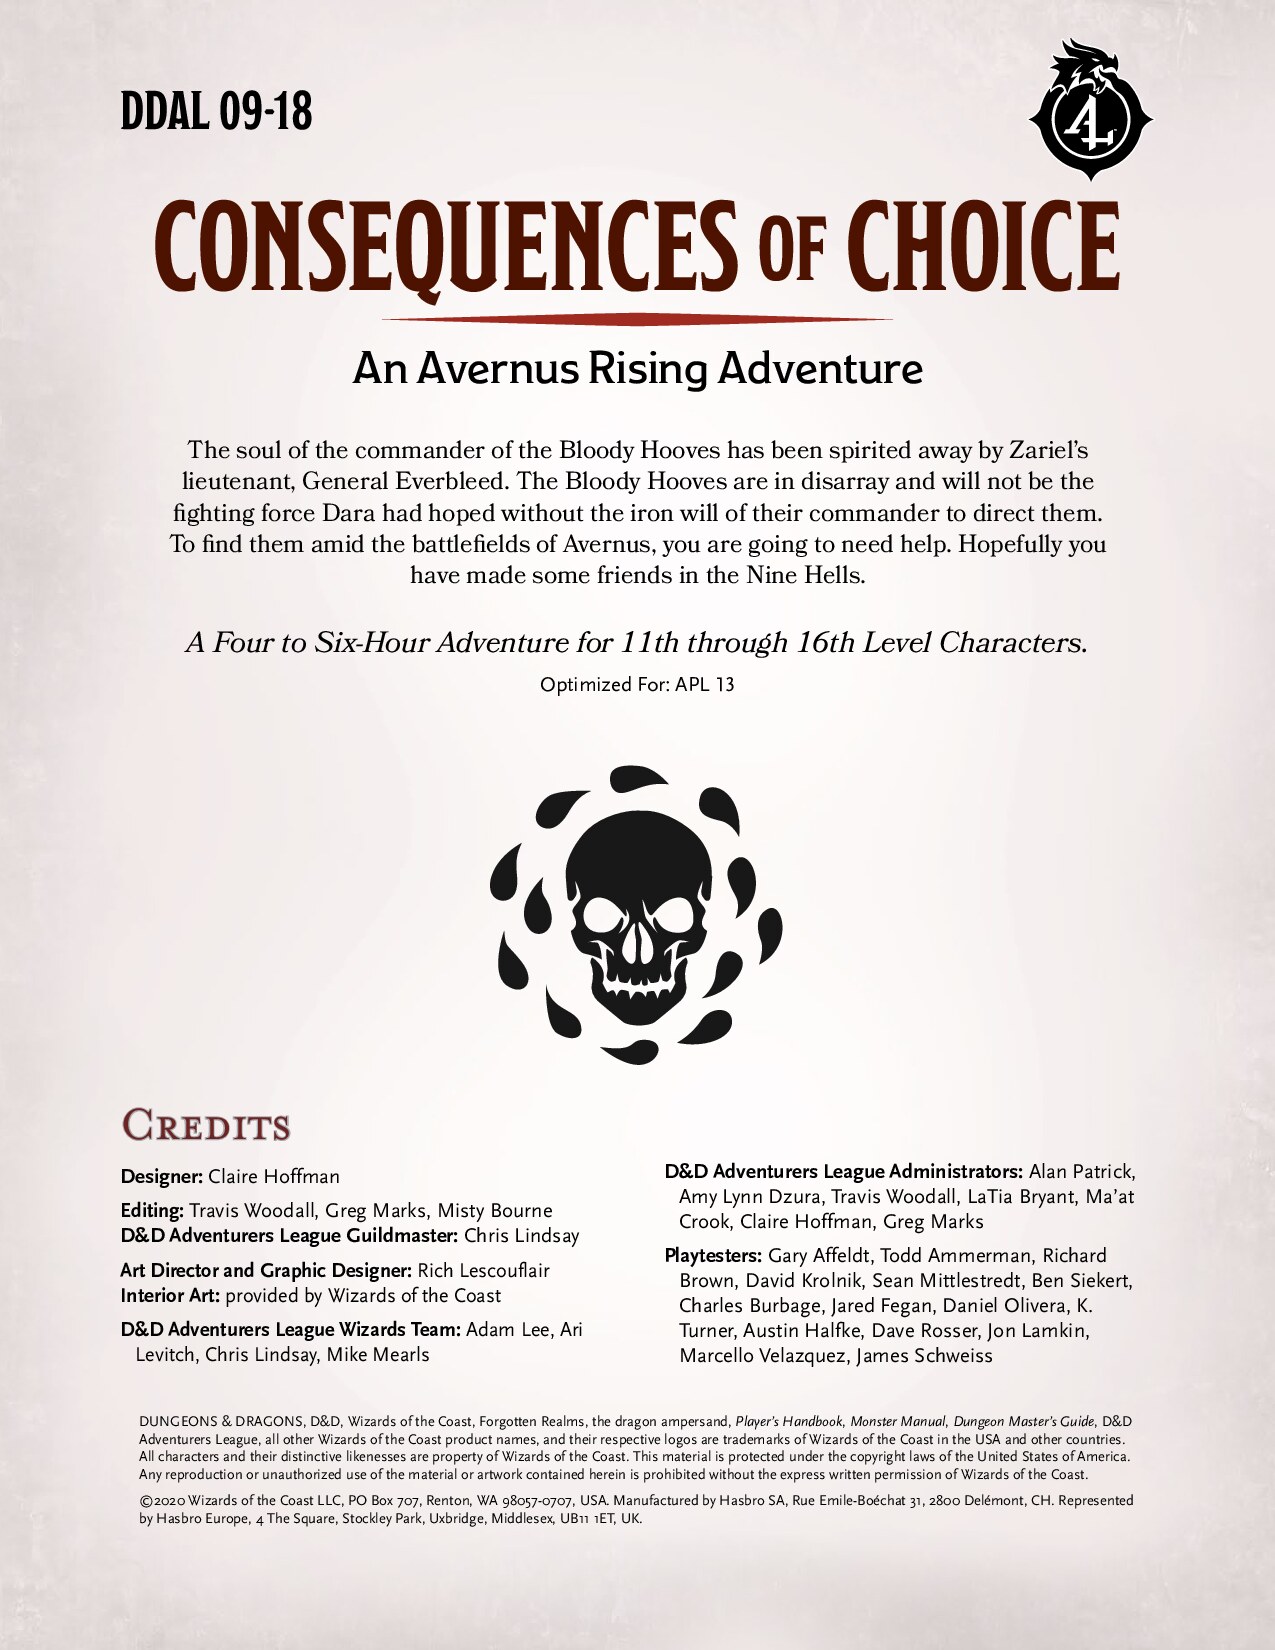 DDAL09-18 - Consequences of Choice